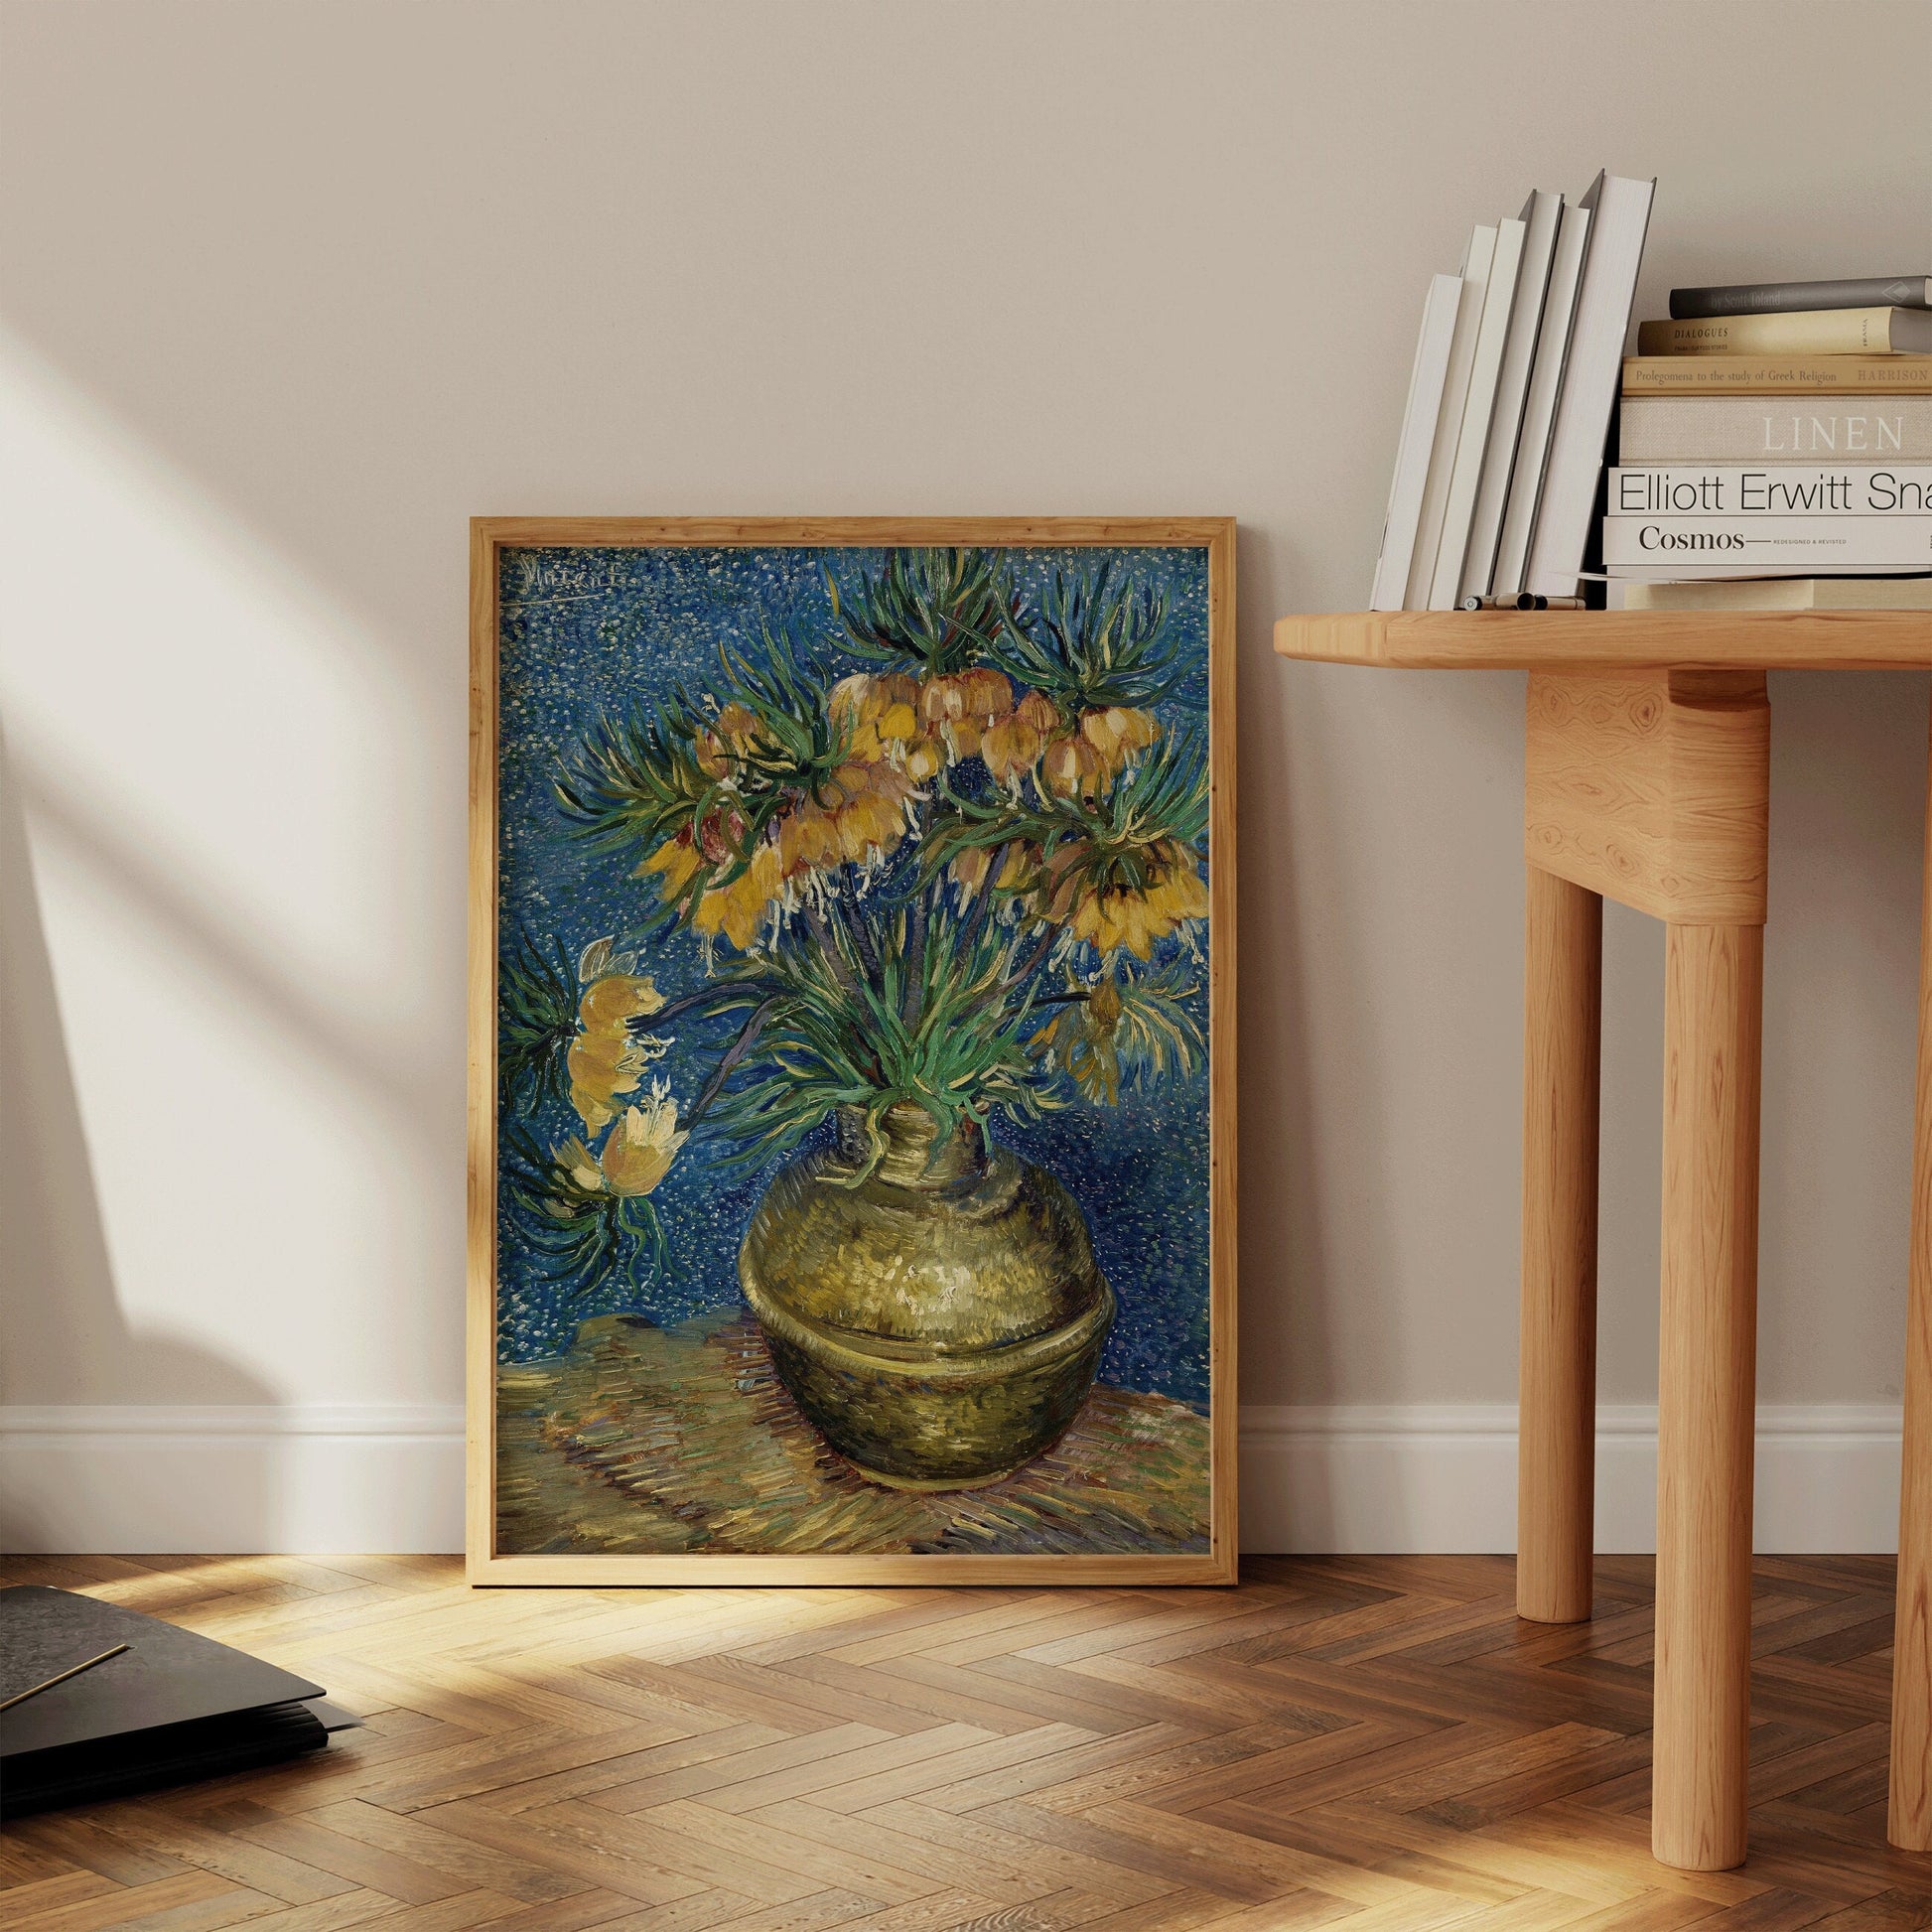 Van Gogh Imperial Fritillaries in a Copper Vase Poster Fine Art Painting Vintage Famous Ready to hang Framed Home Office Decor Gift Idea